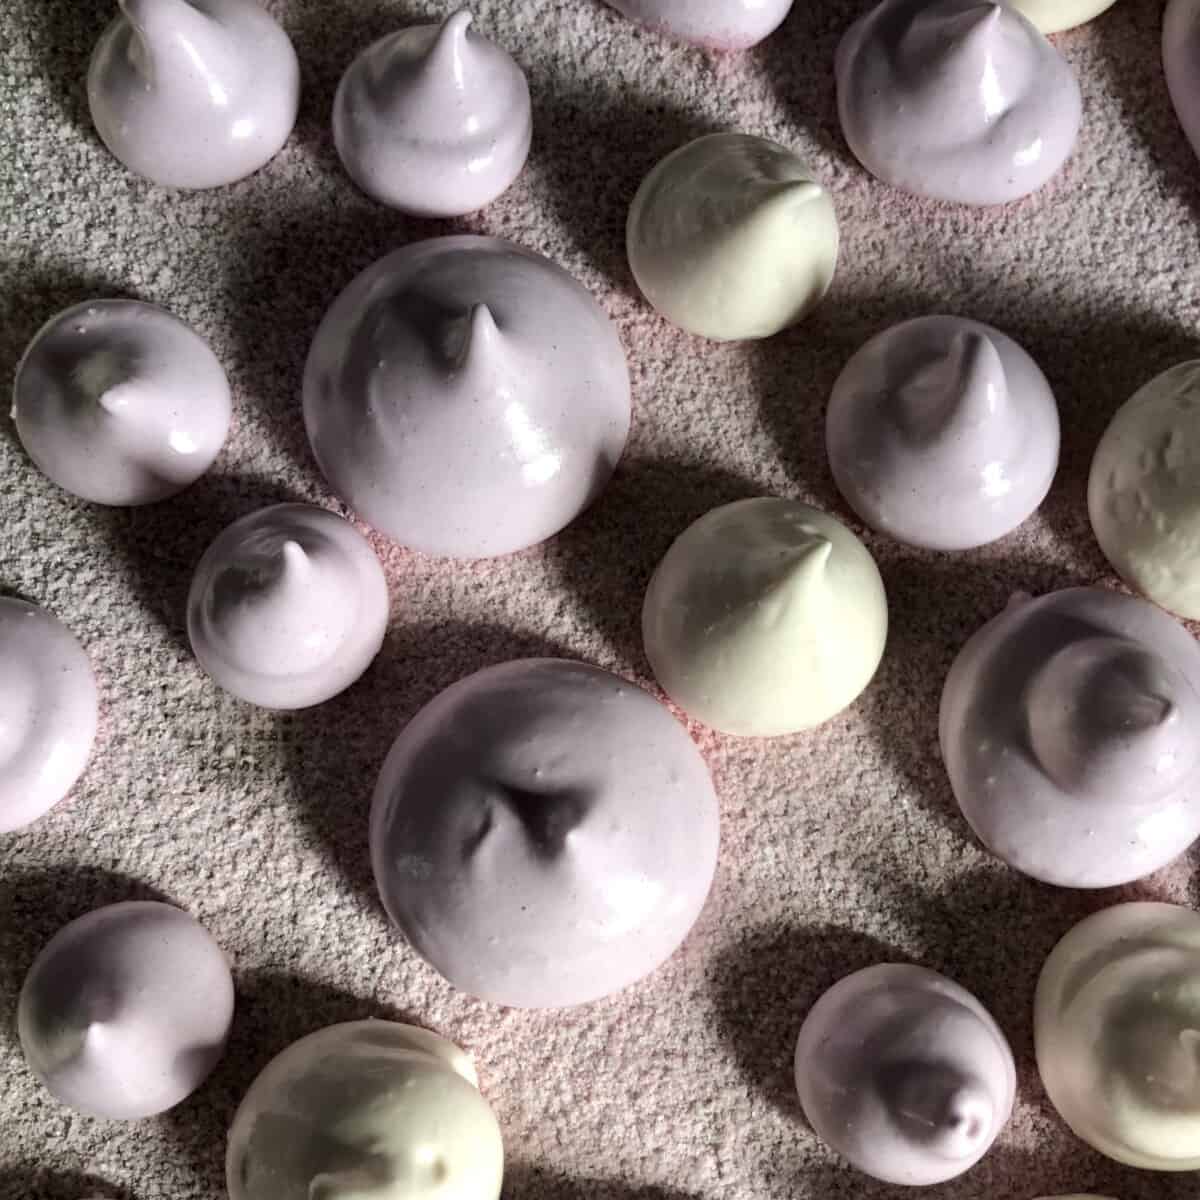 smooth and shiny lavender and white drop-shaped piped marshmallows on a dusted baking tray